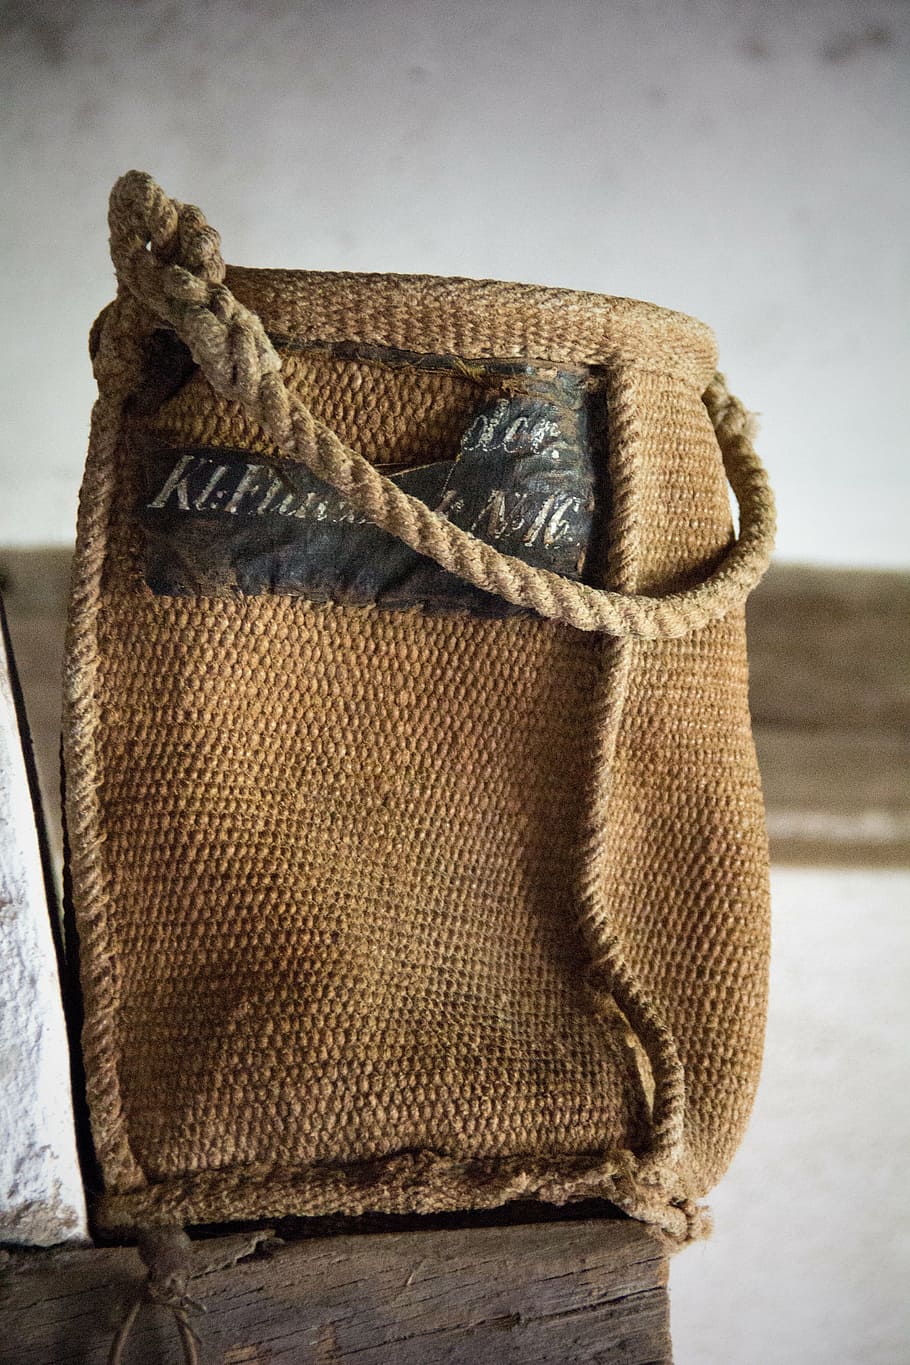 bag, jute bag, jute, fabric, texture, natural material, tissue, gift bag, coffee, structure